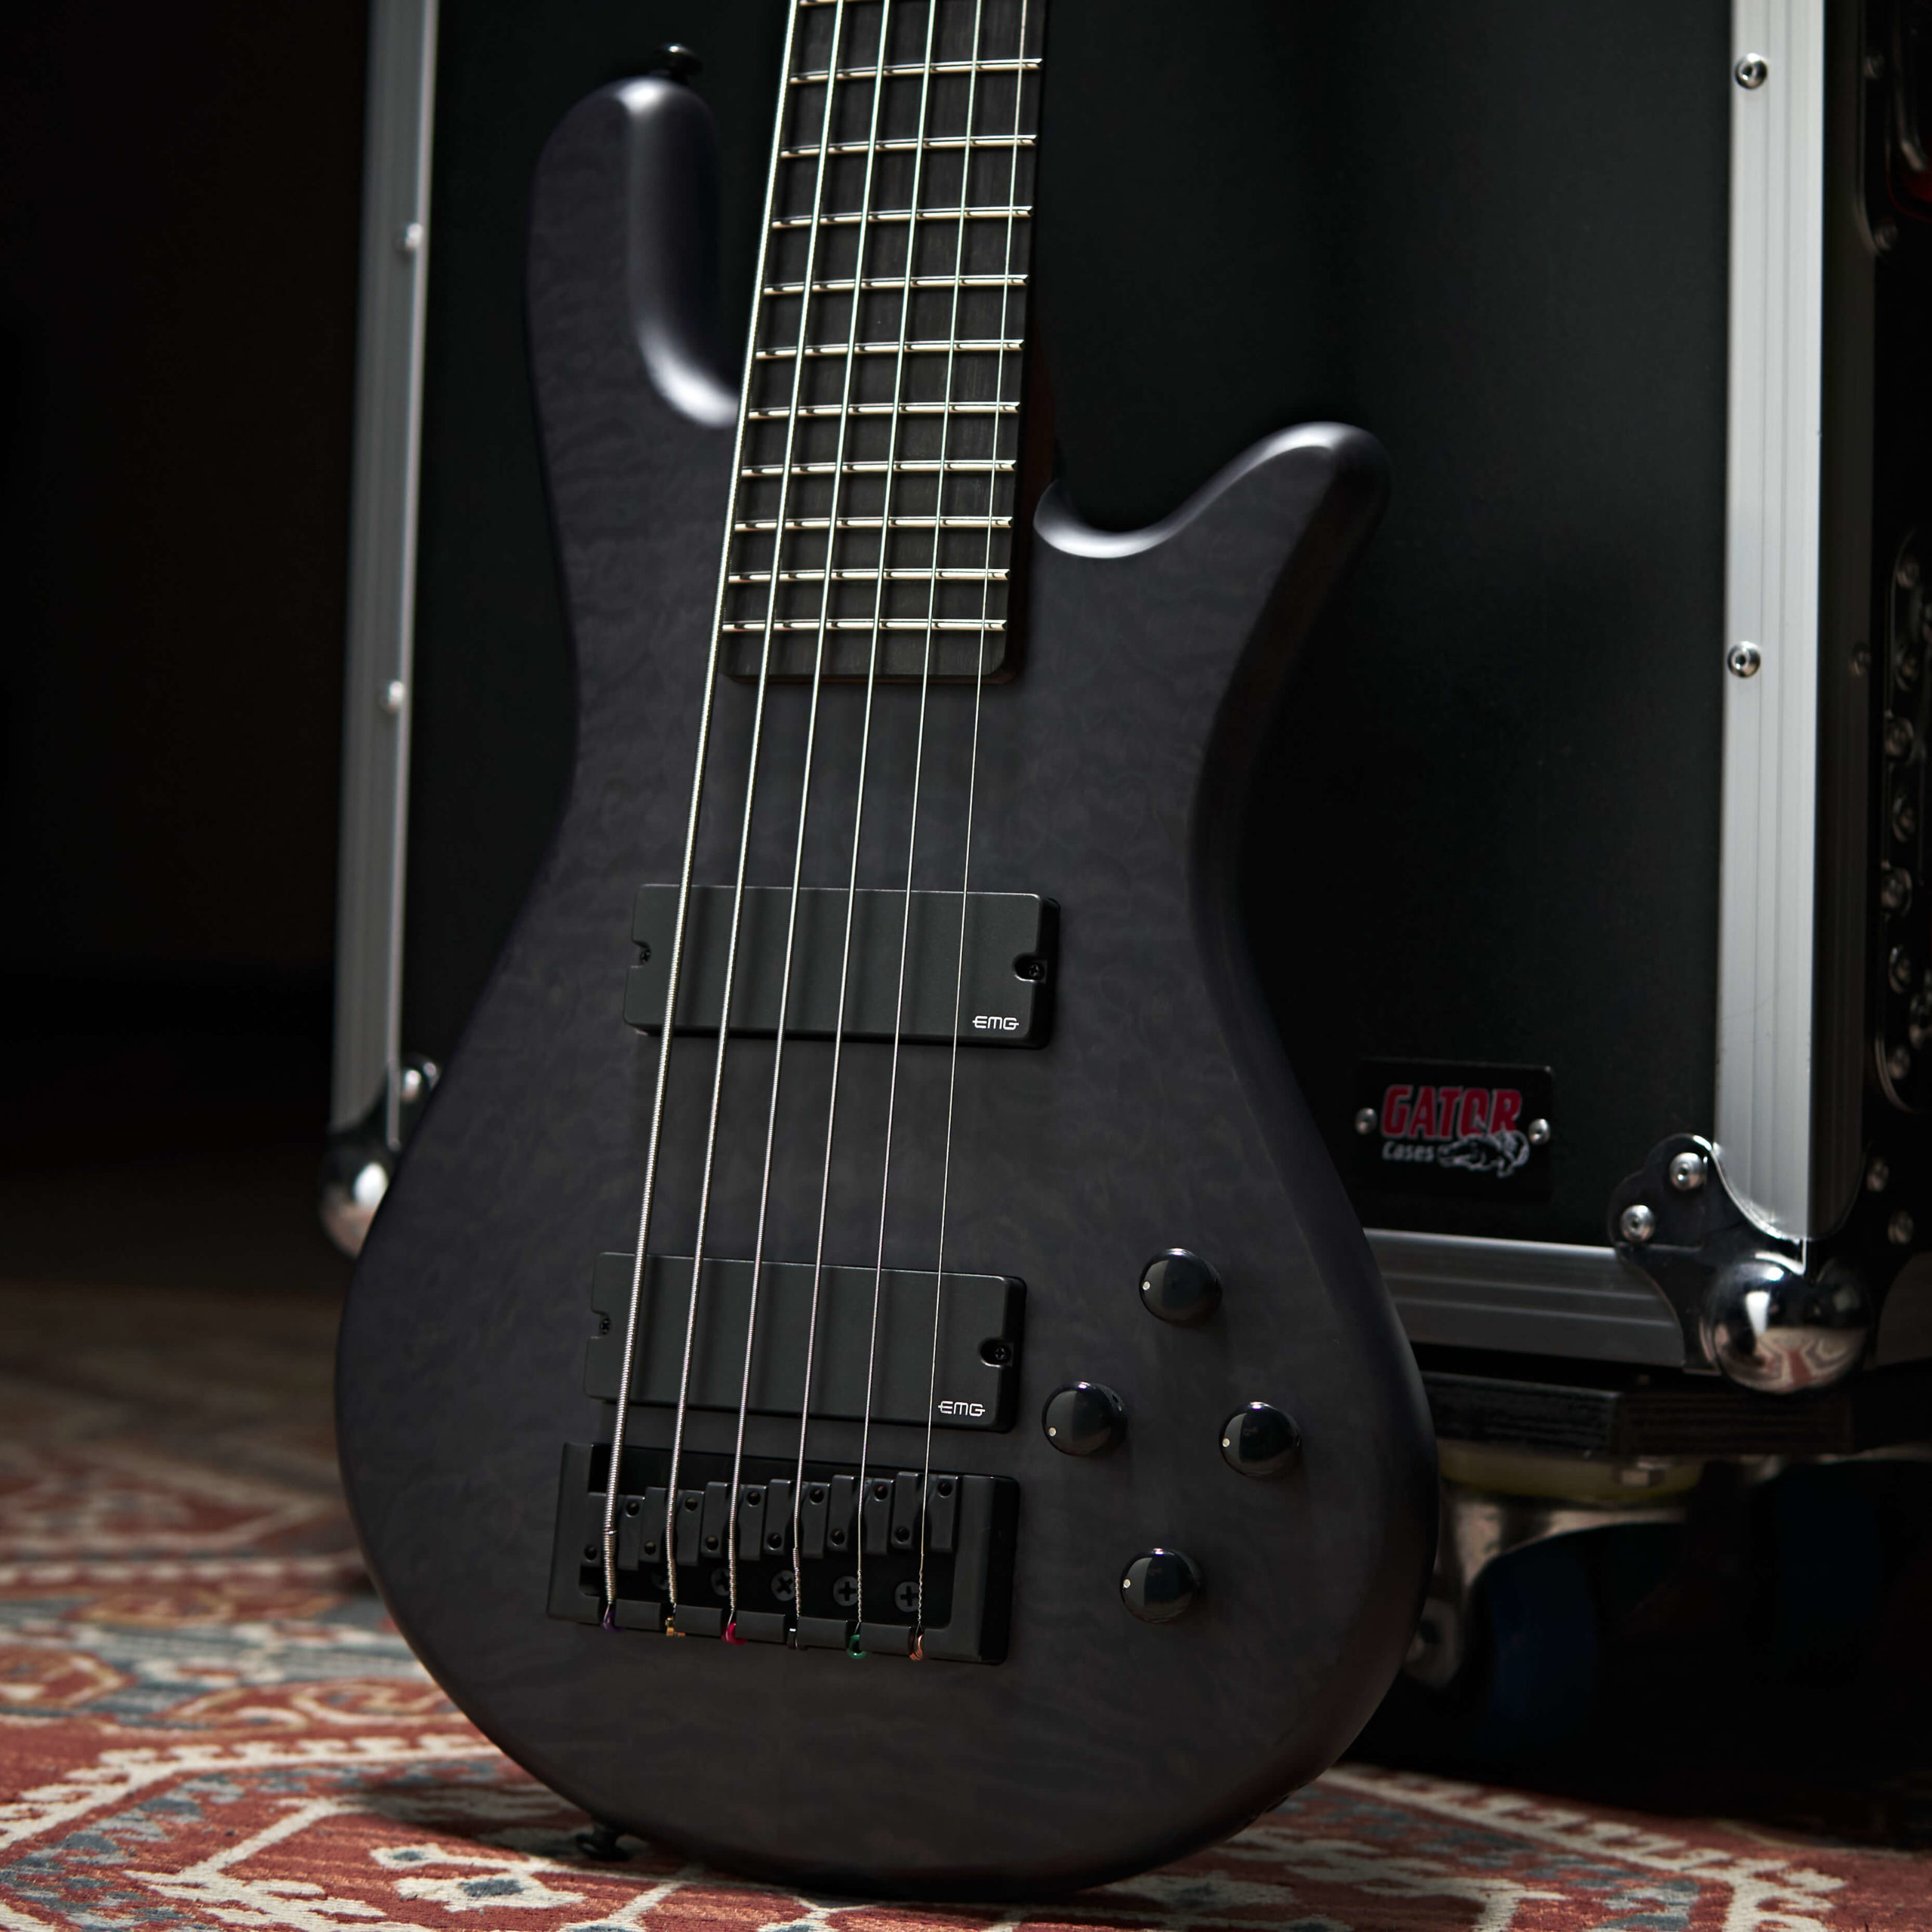 Spector Ns Pulse Ii 6c Active Emg Eb - Black Stain Matte - Solidbody E-bass - Variation 3